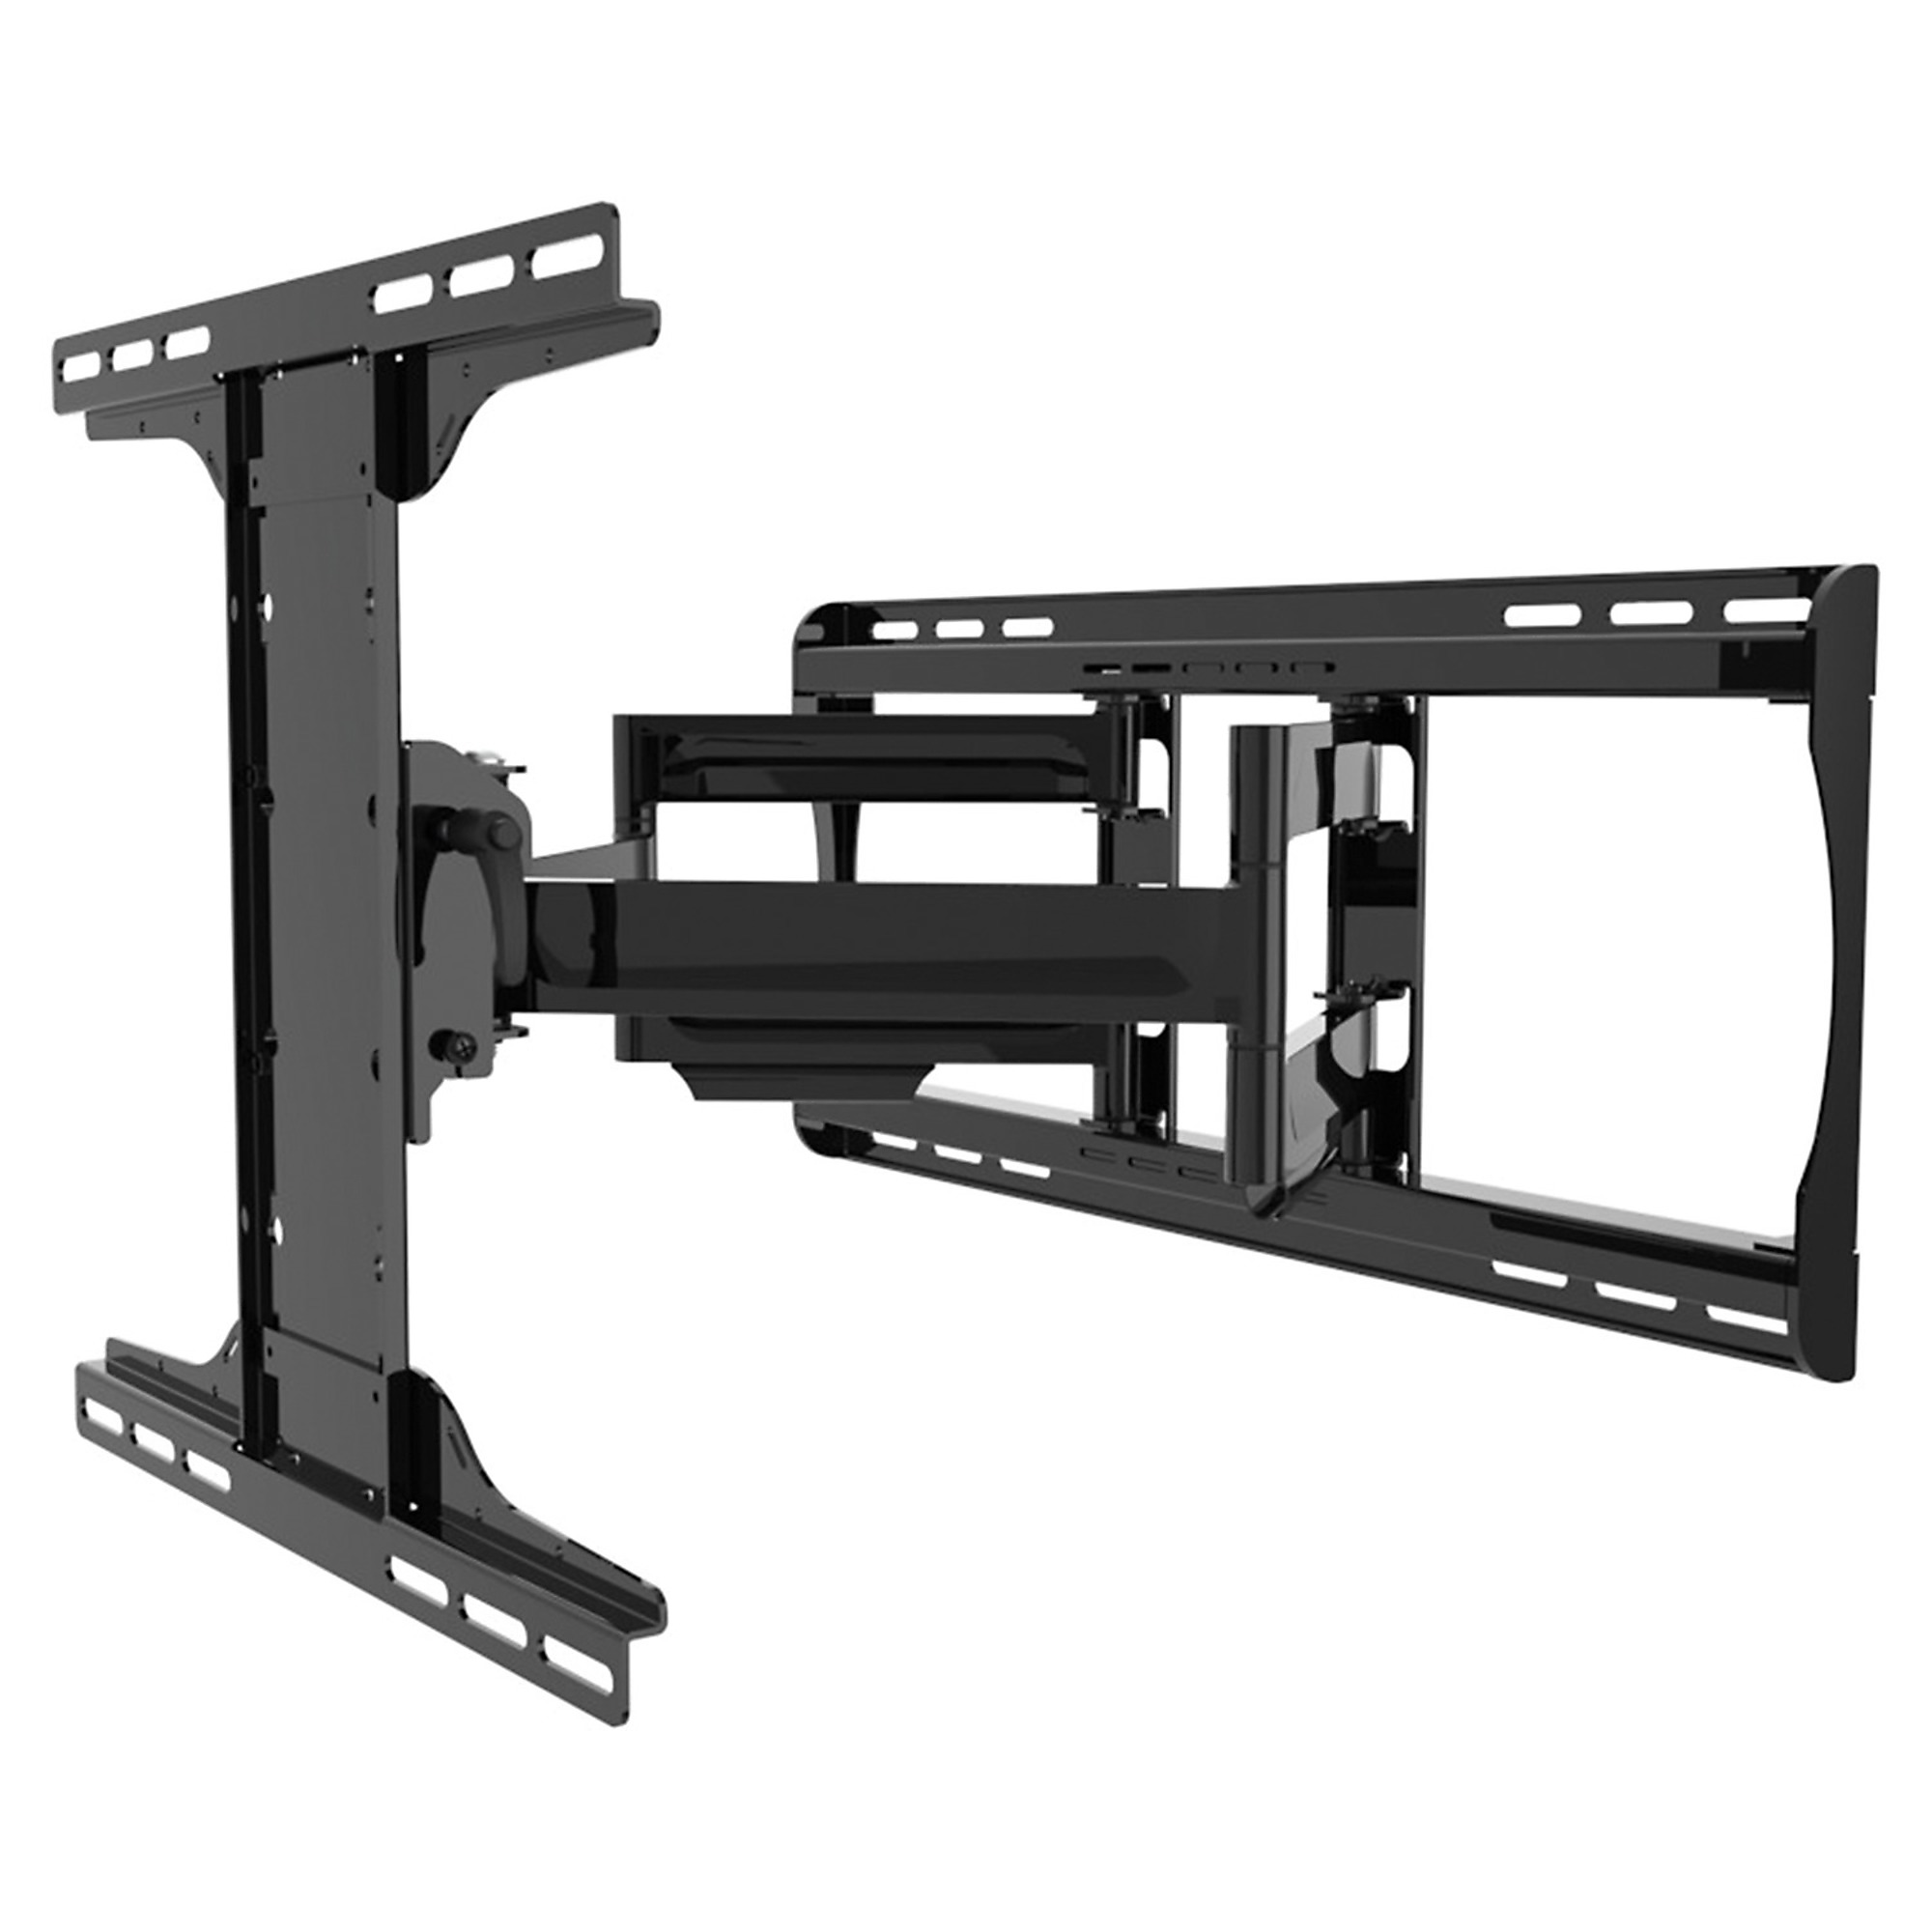 Peerless Paramount Series, 39Inch to 90Inch Articulating Wall Mount, Capacity 150 lb, Material Steel, Color Finish Black, Model PA762